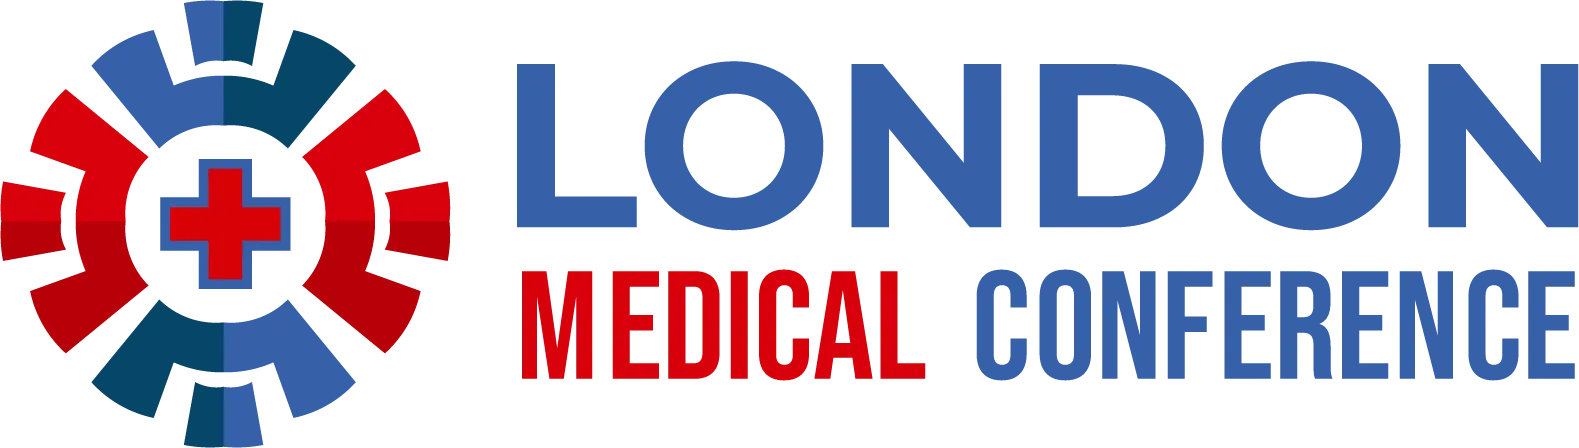 London Medical Conference